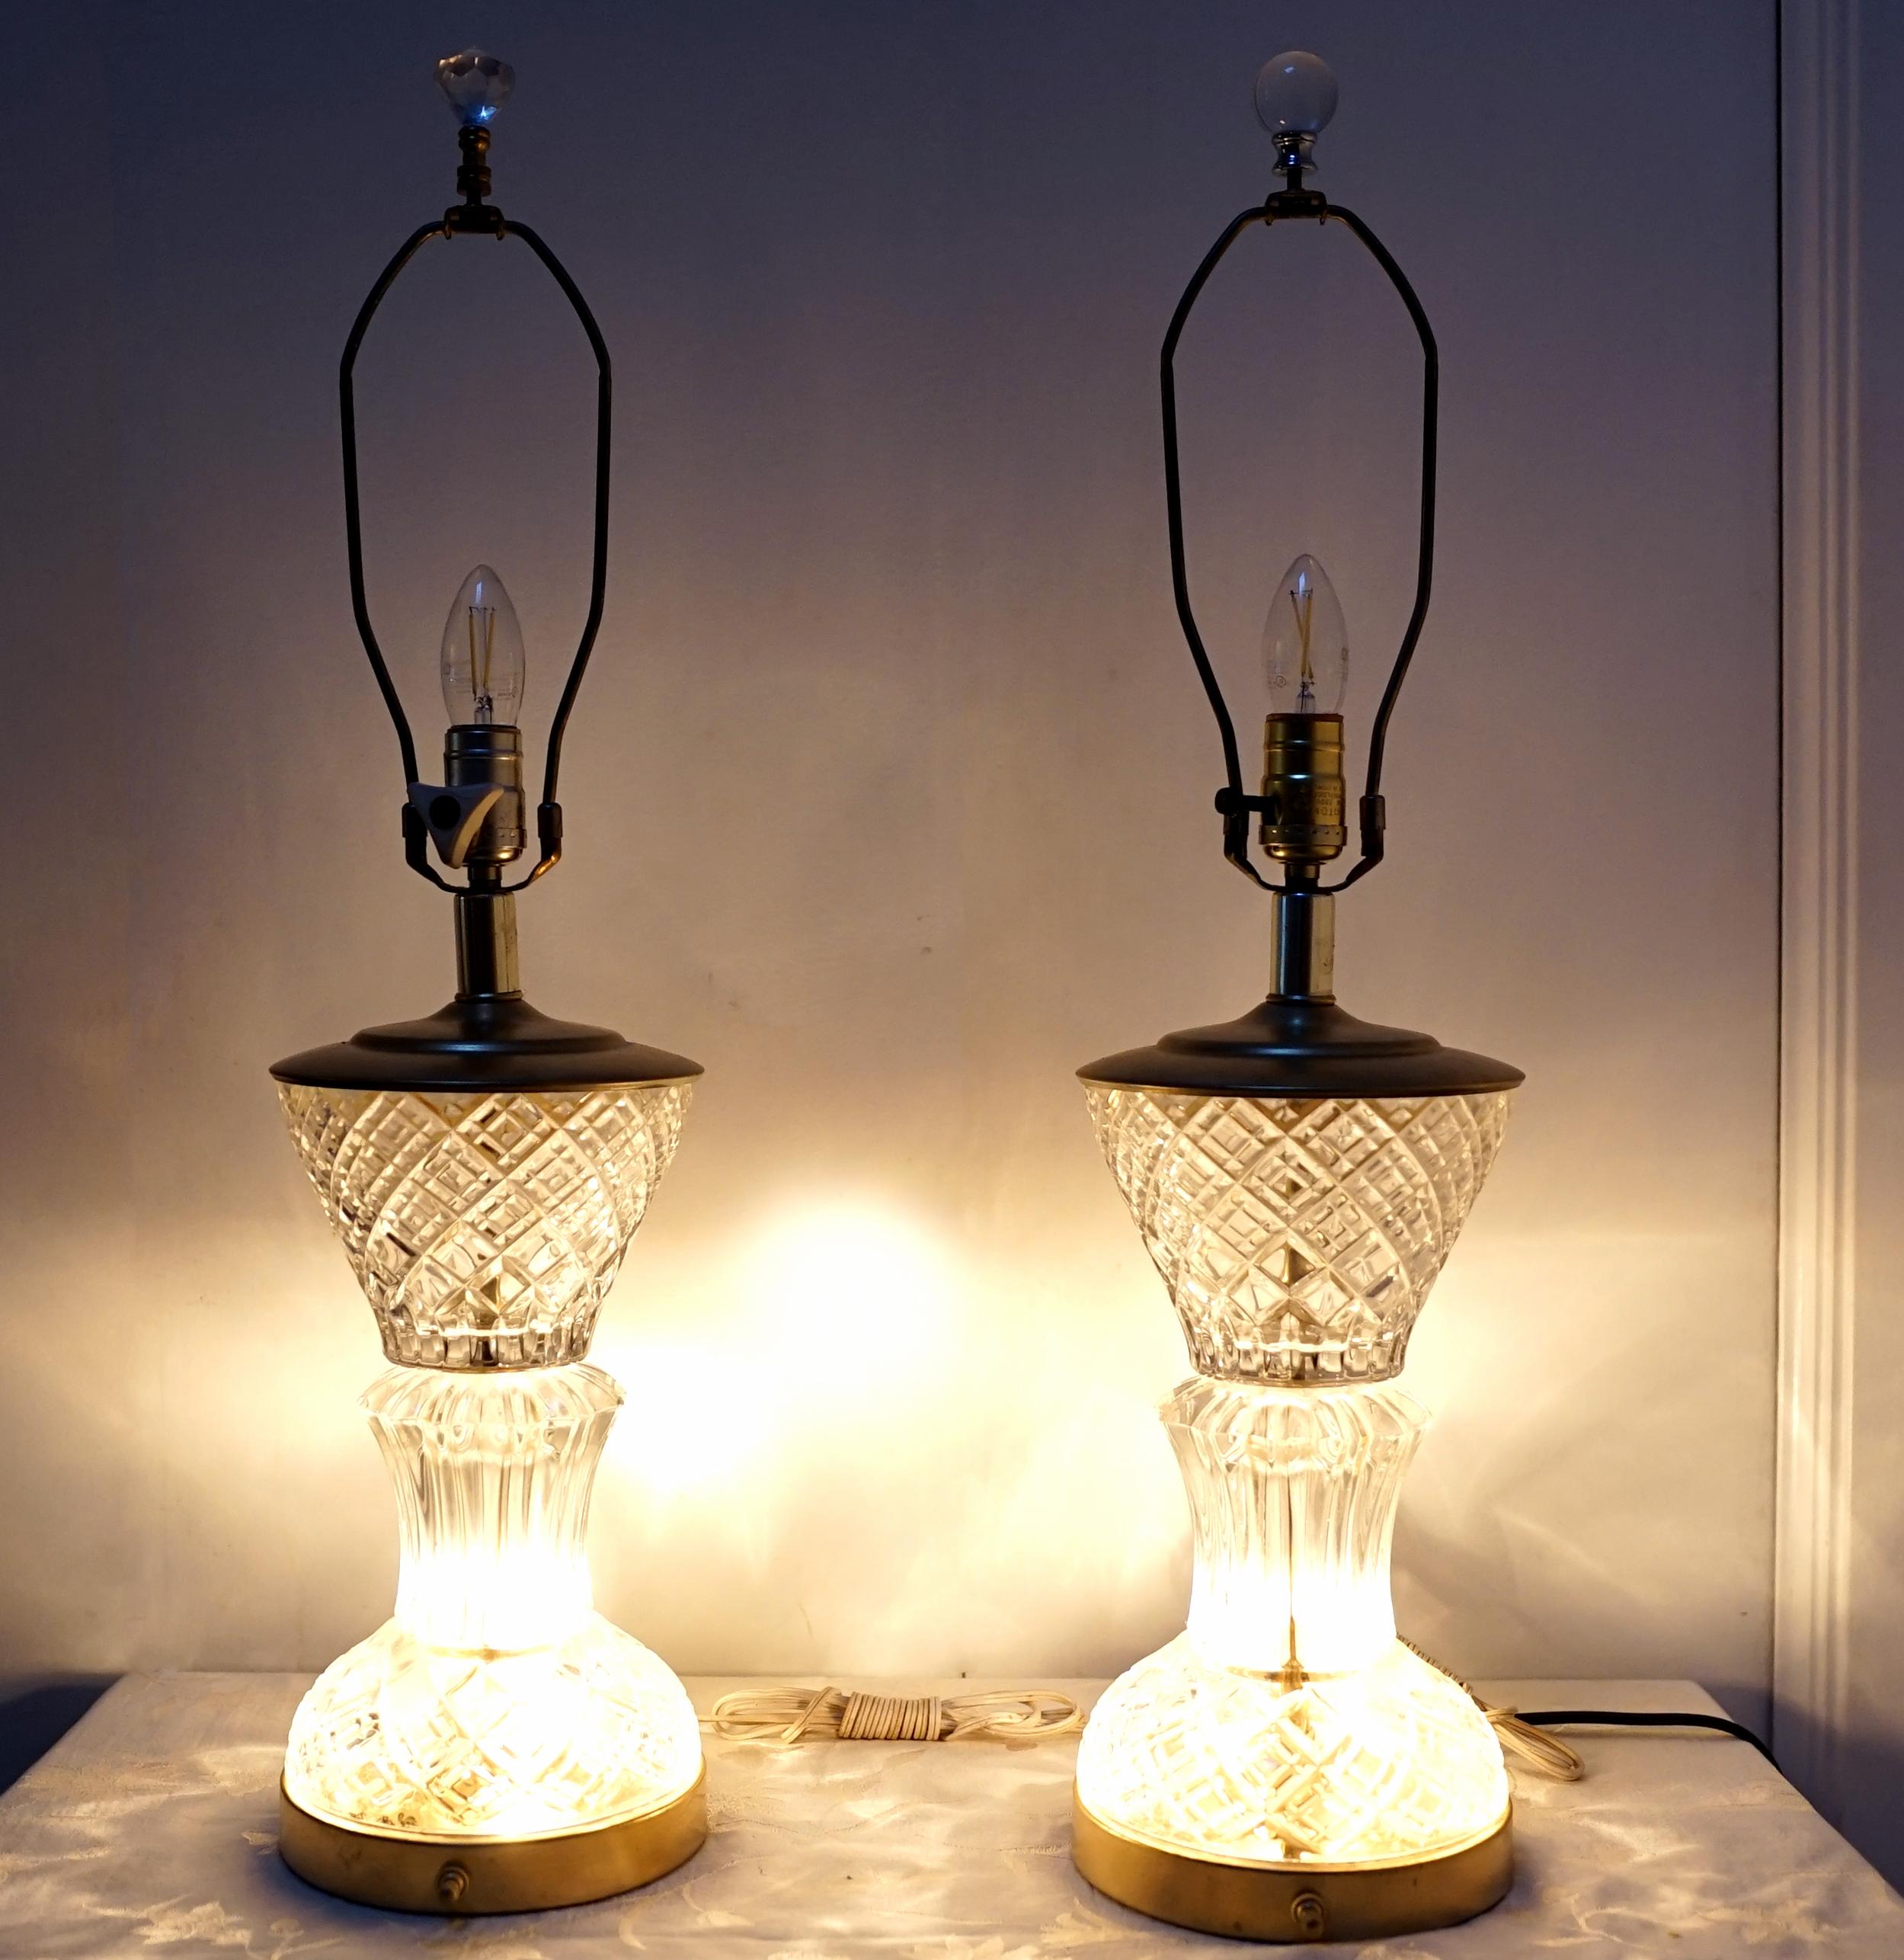 Crystal Art Deco Trumpet Style Pair of Table Lamps circa 1925 For Sale 1